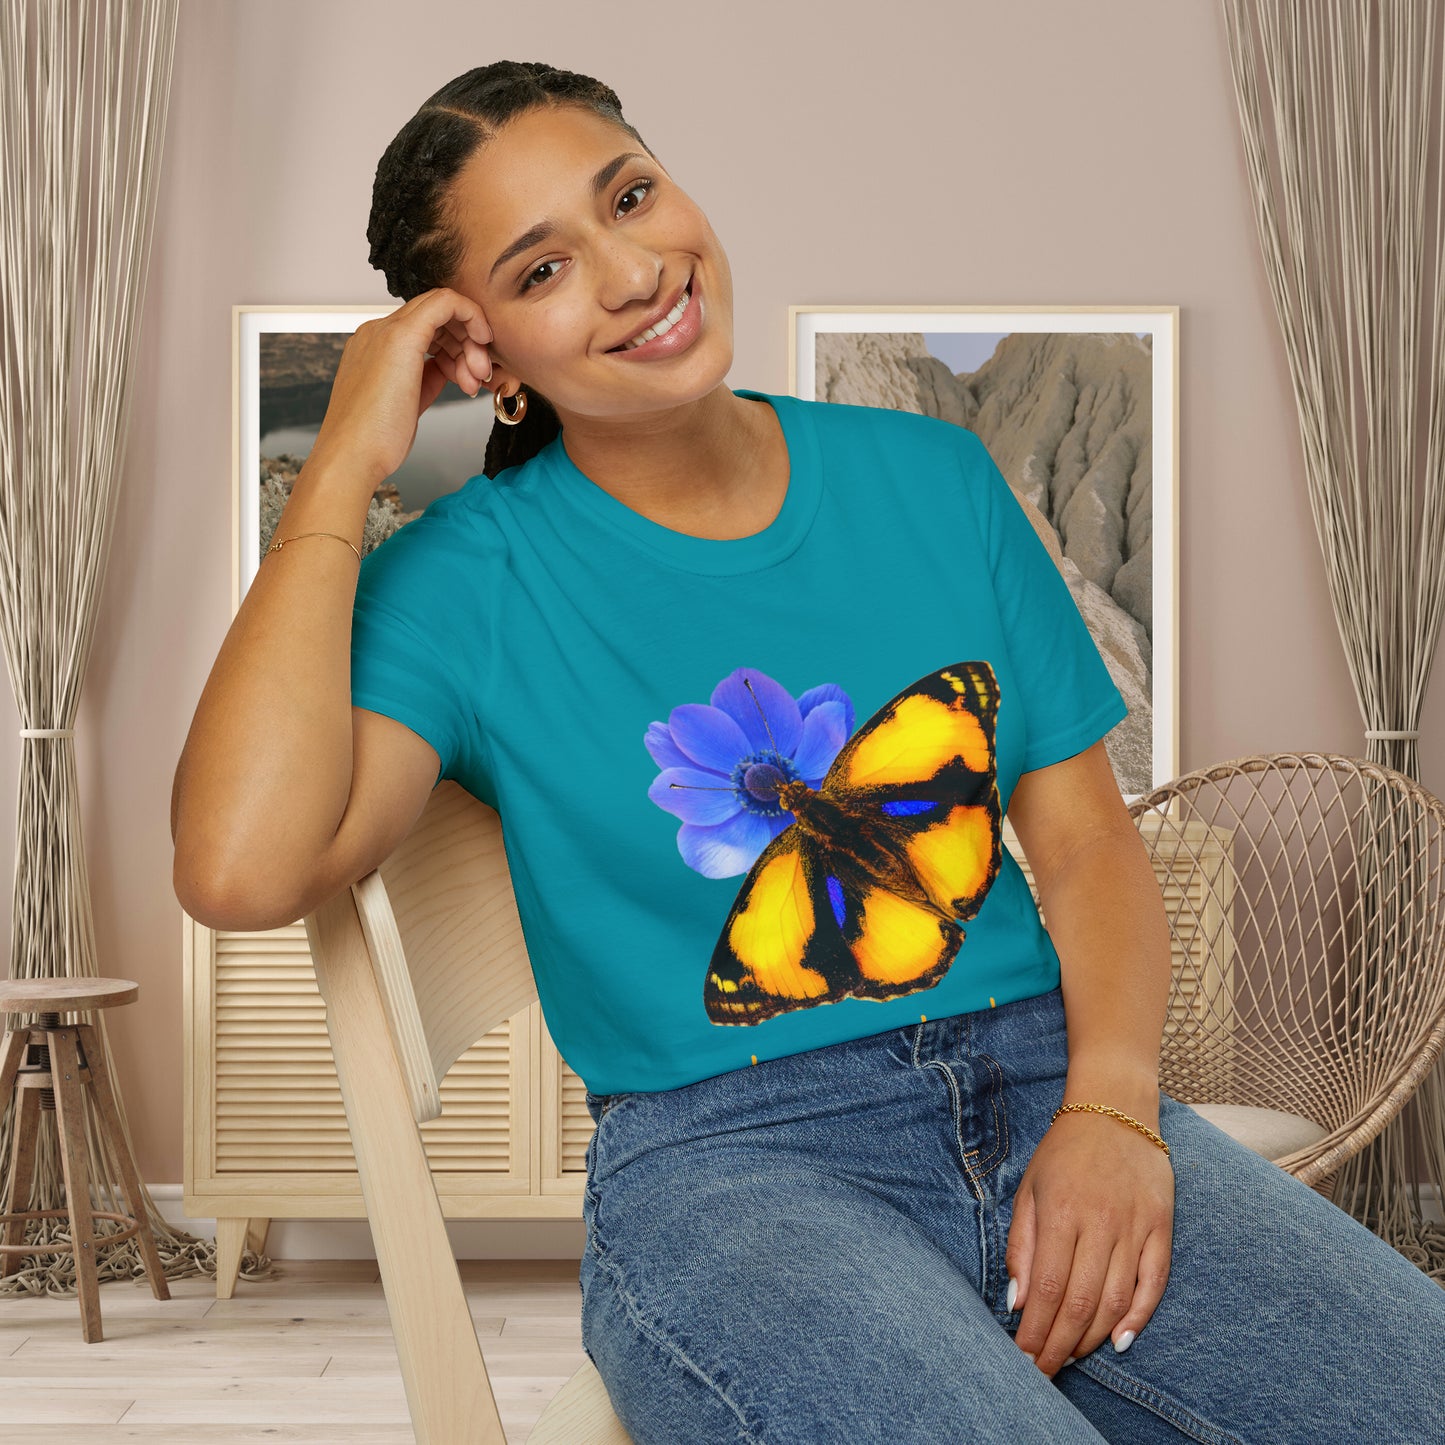 Beautiful “become the change" Unisex Softstyle T-Shirt butterfly design. Great as a gift or get one for yourself.